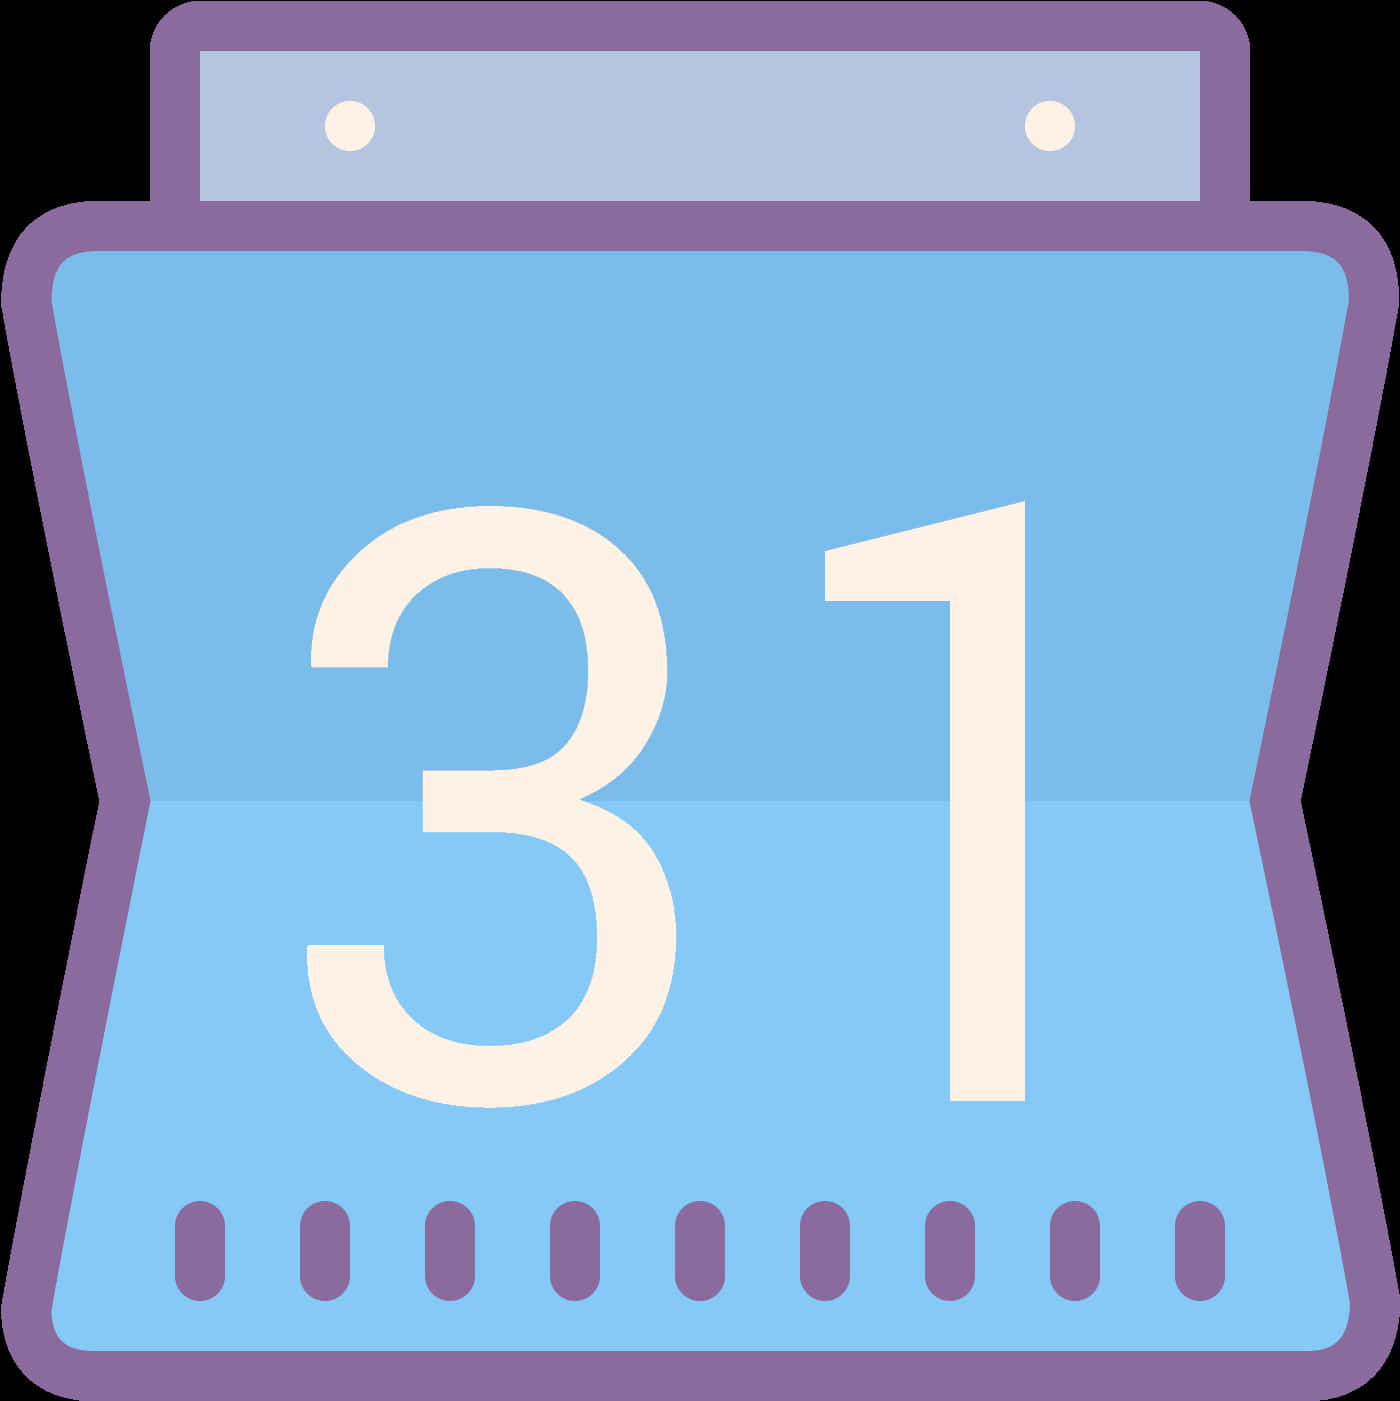 A Blue Calendar With White Numbers